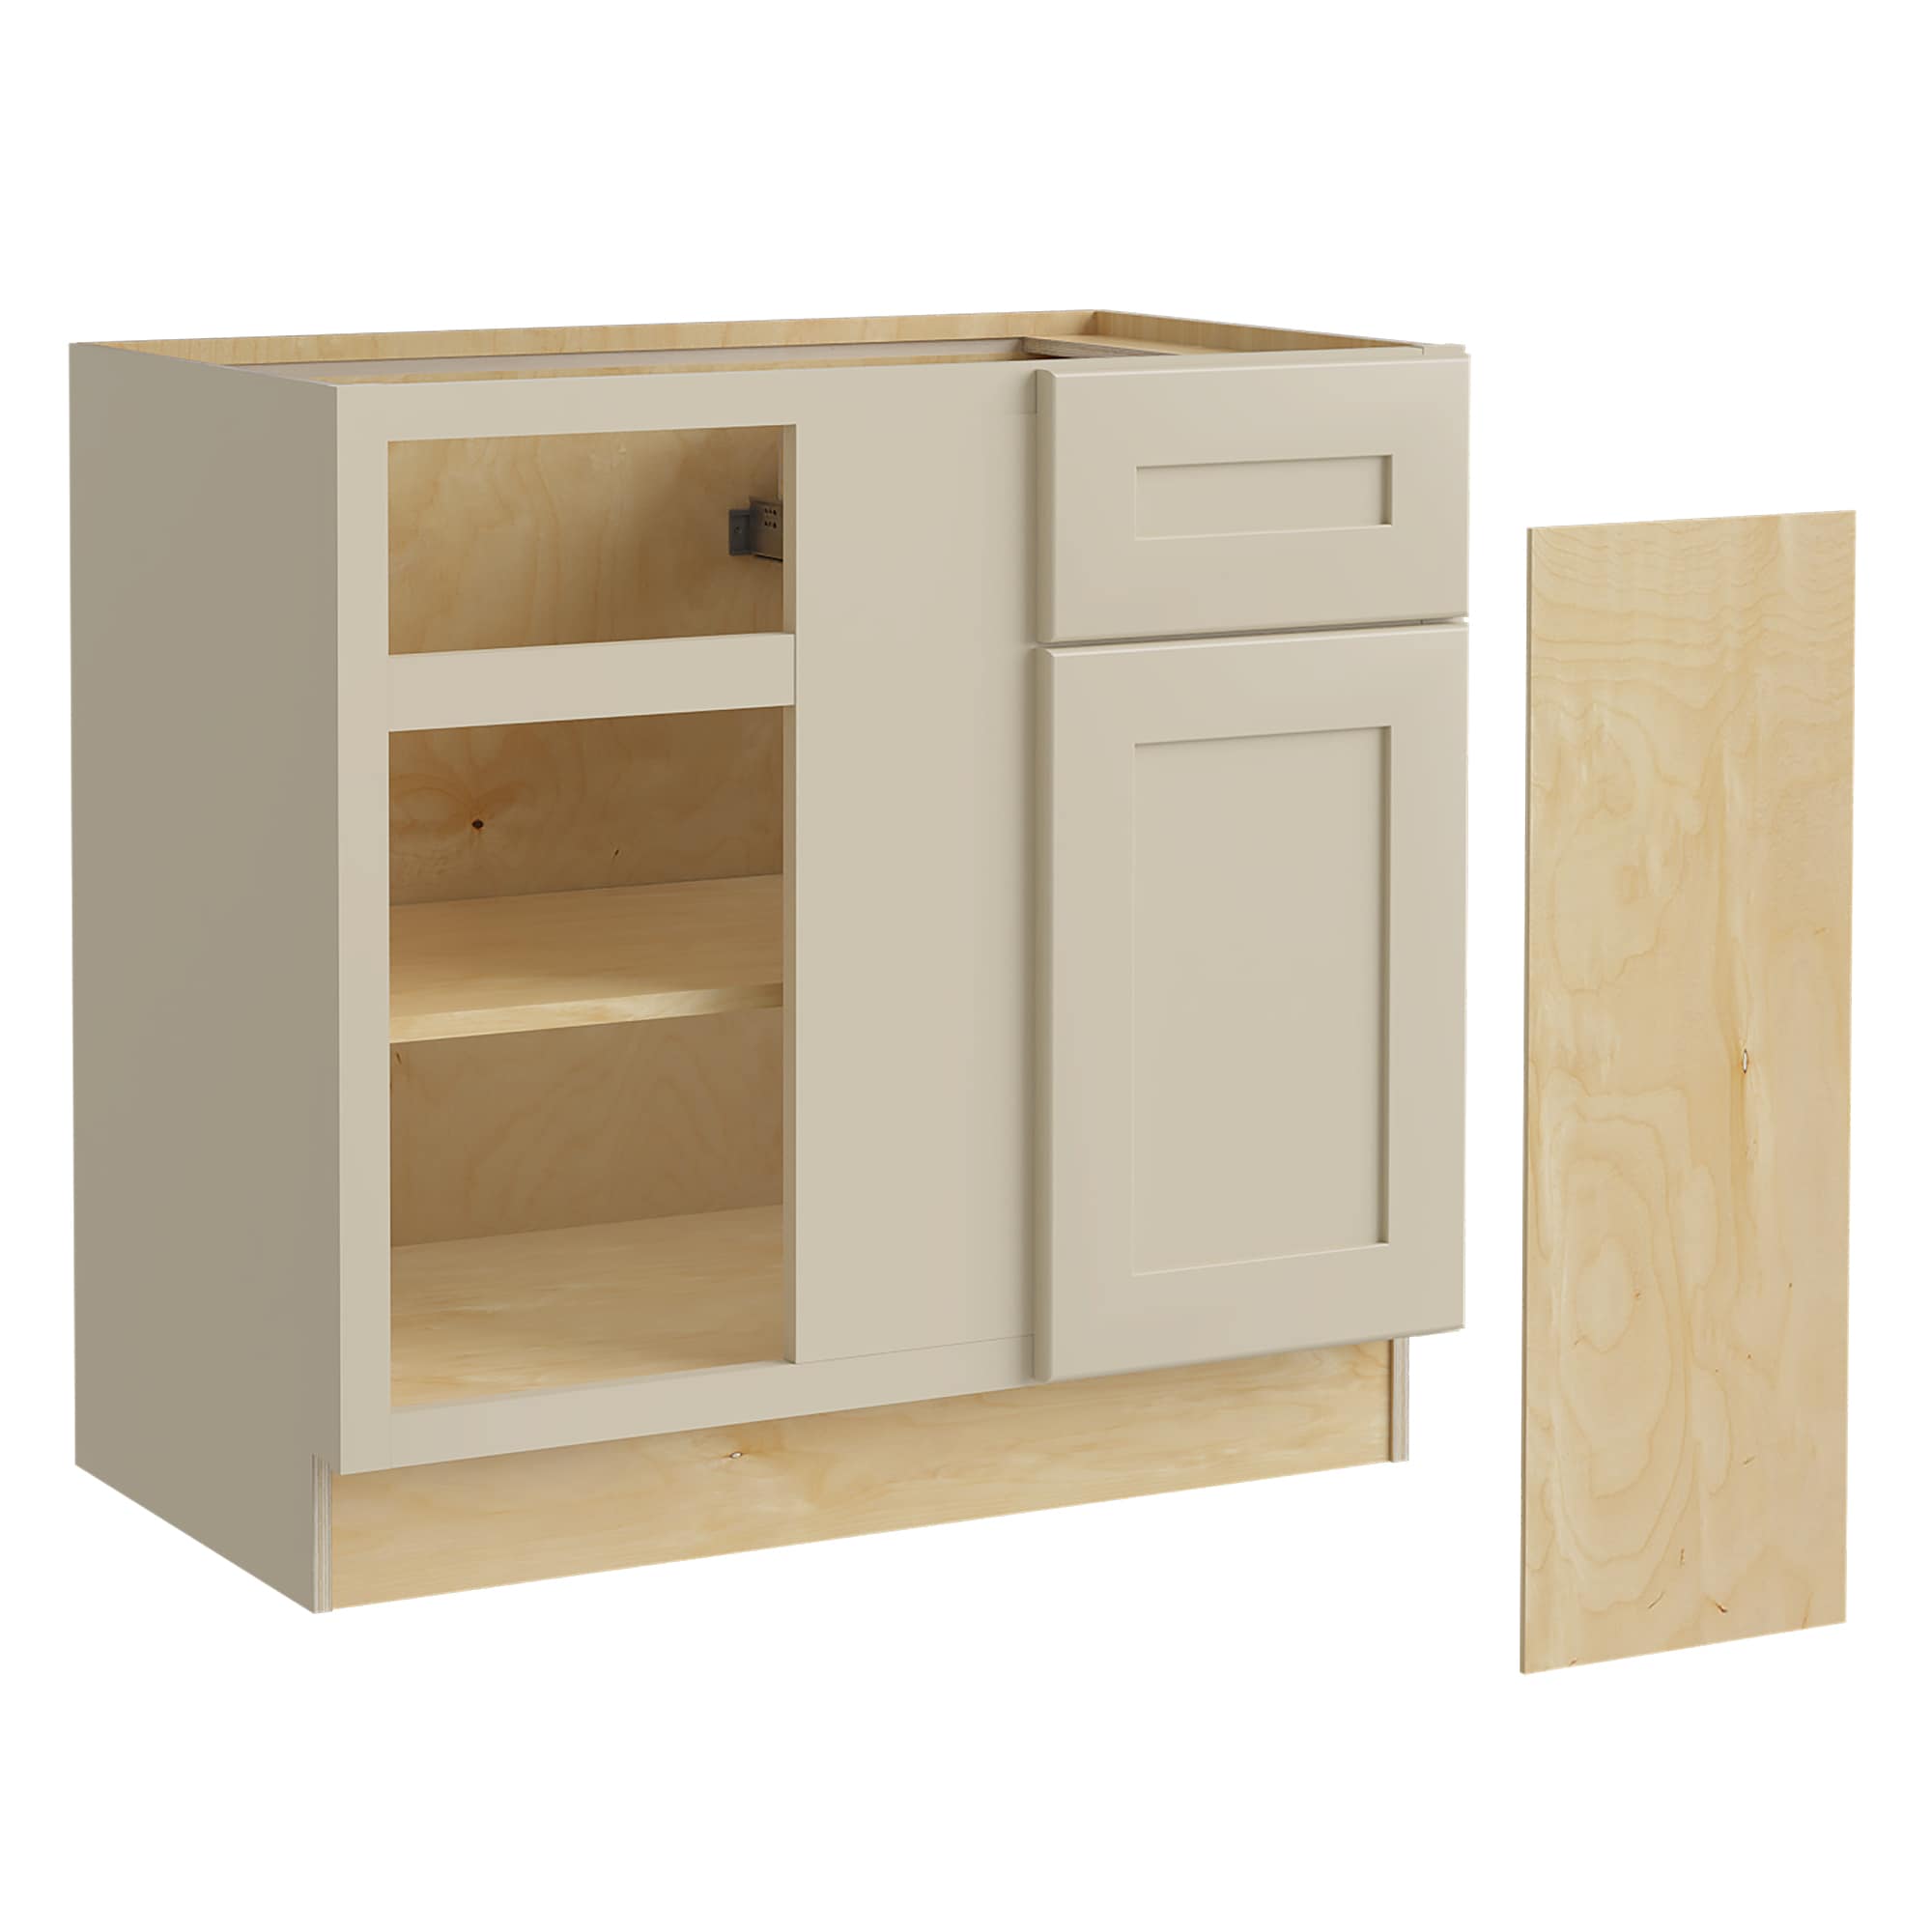 Luxxe Cabinetry 36-in W x 34.5-in H x 24-in D Norfolk Blended Cream Painted Blind Corner Base Fully Assembled Semi-custom Cabinet in Off-White